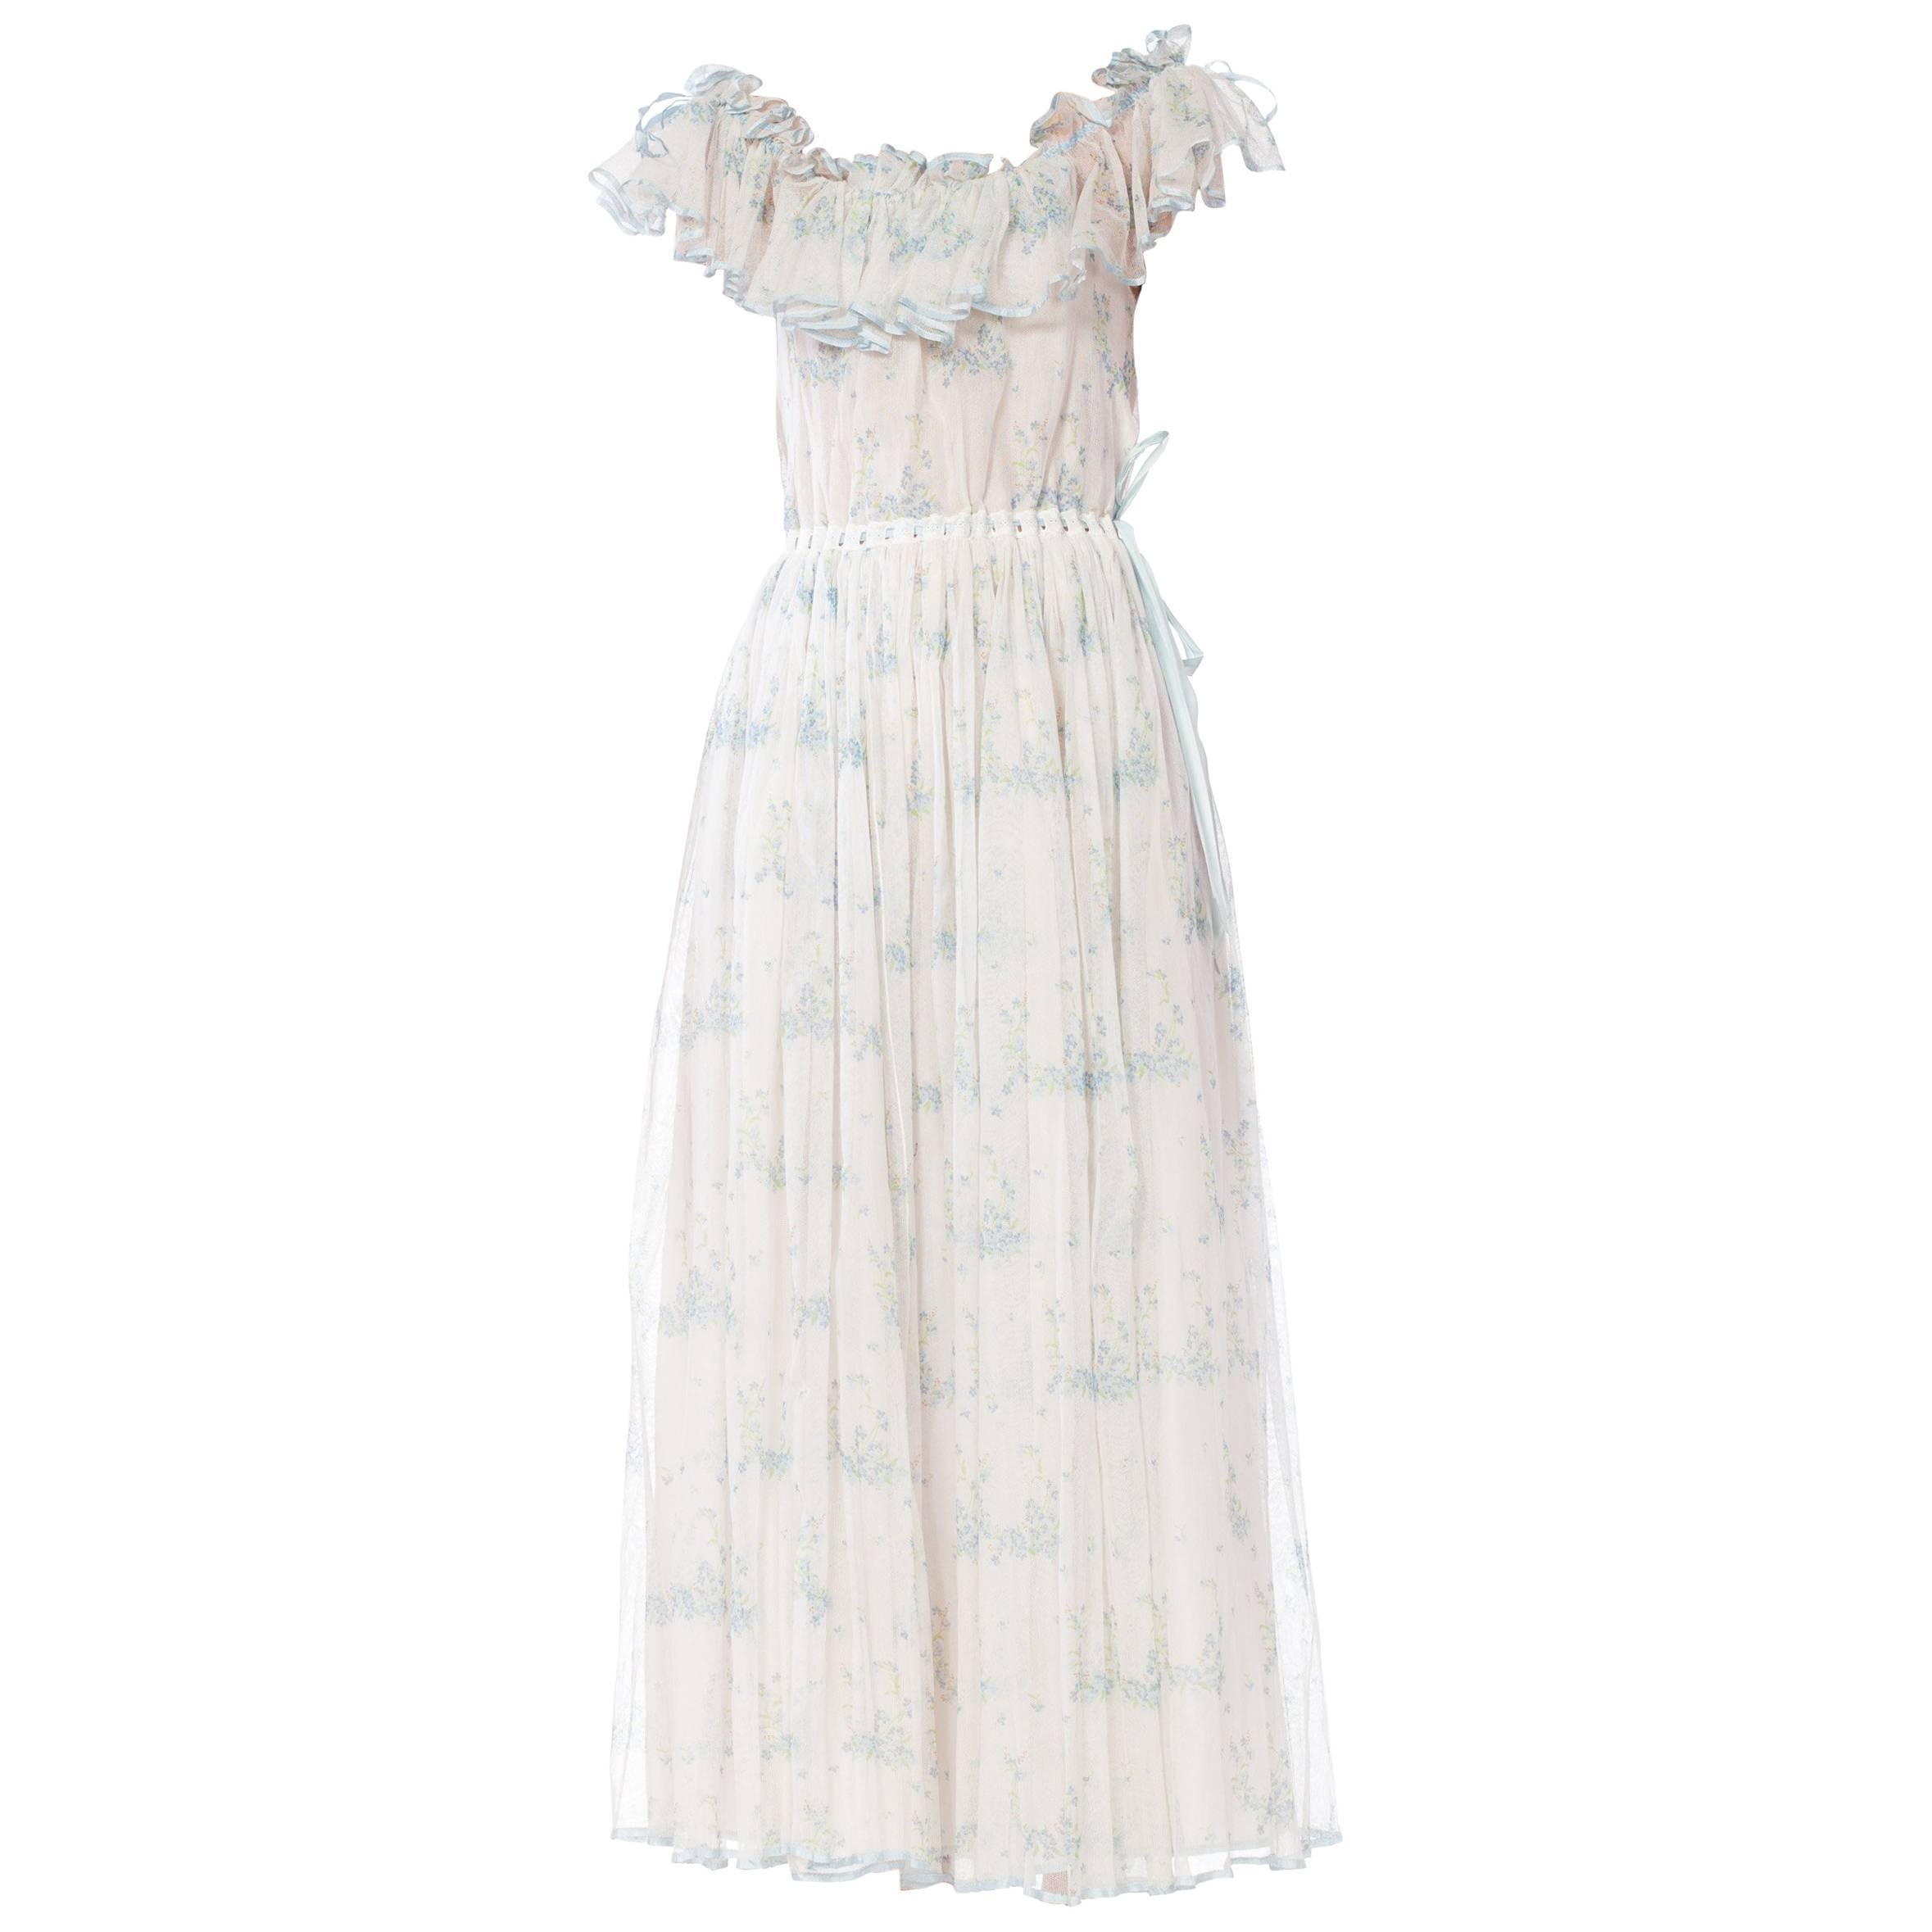 1970S Pale Blue Floral Printed Cotton Tulle Ruffled Maxi Dress Lined In Silk For Sale